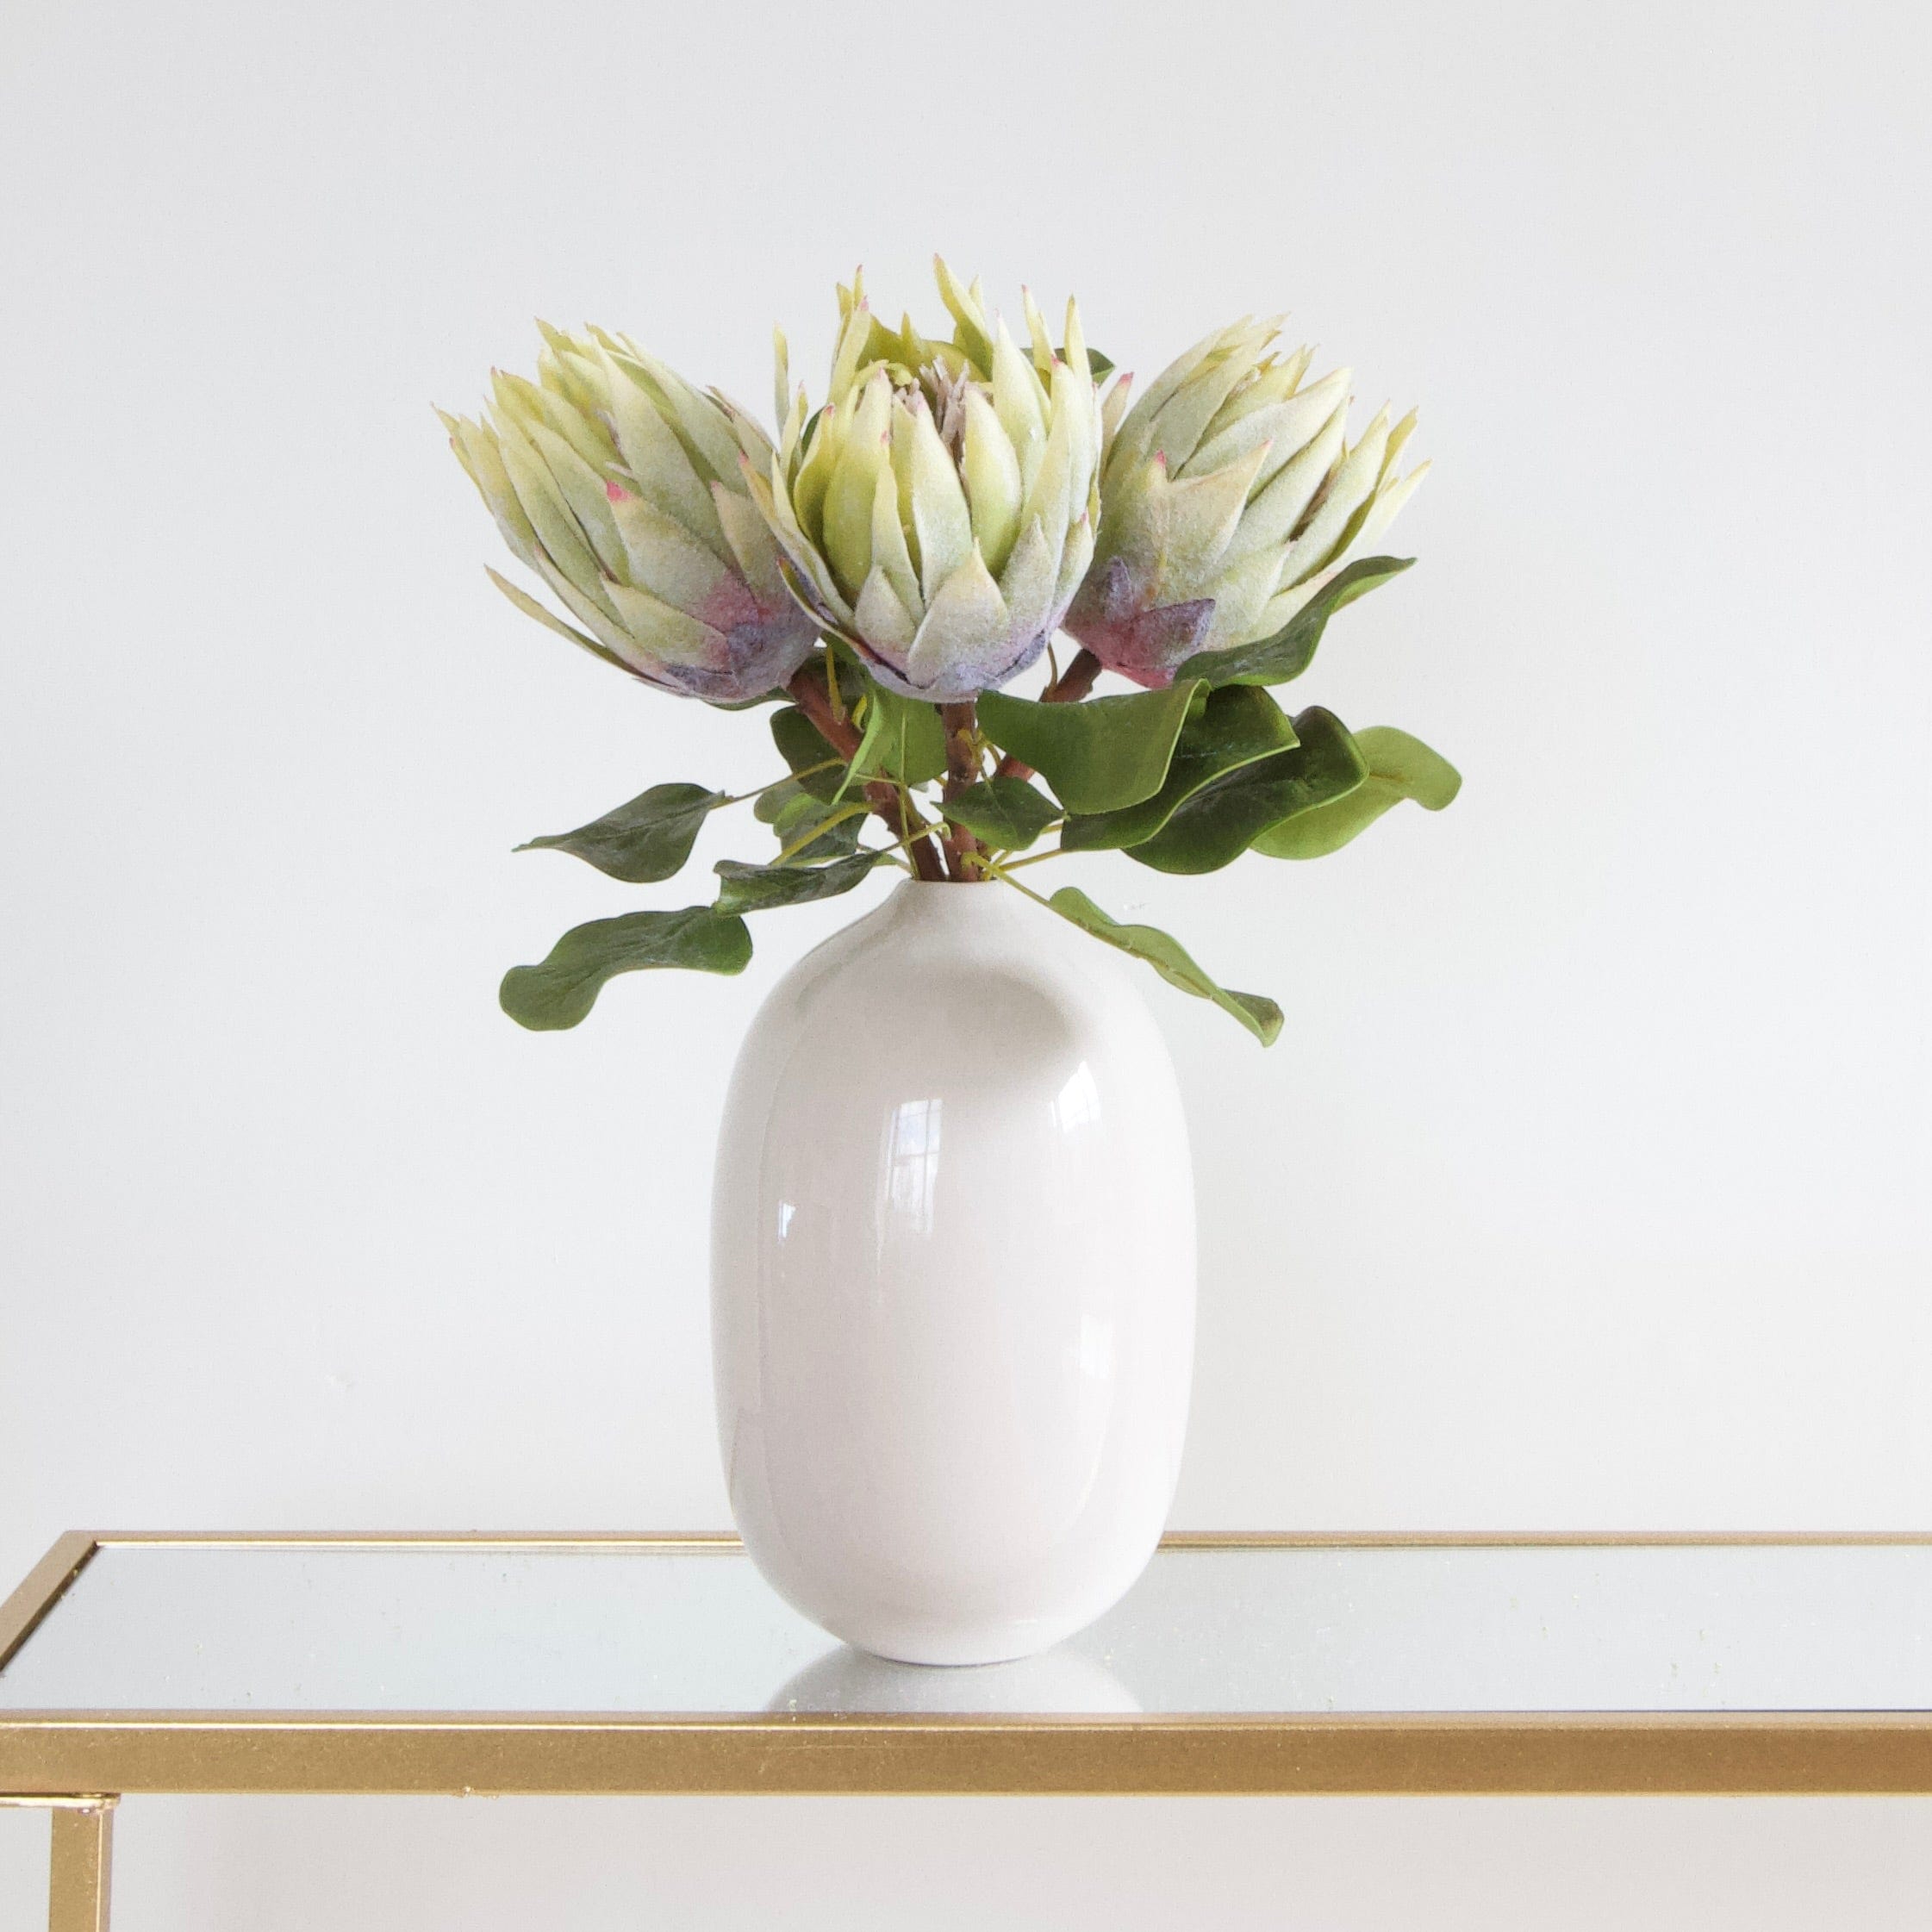 Luxury Lifelike Realistic Artificial Fabric Silk Blooms with Foliage Buy Online from The Faux Flower Company | Green King Proteas ABY7018GR White Gloss Ceramic Broadway Vase ABP1699